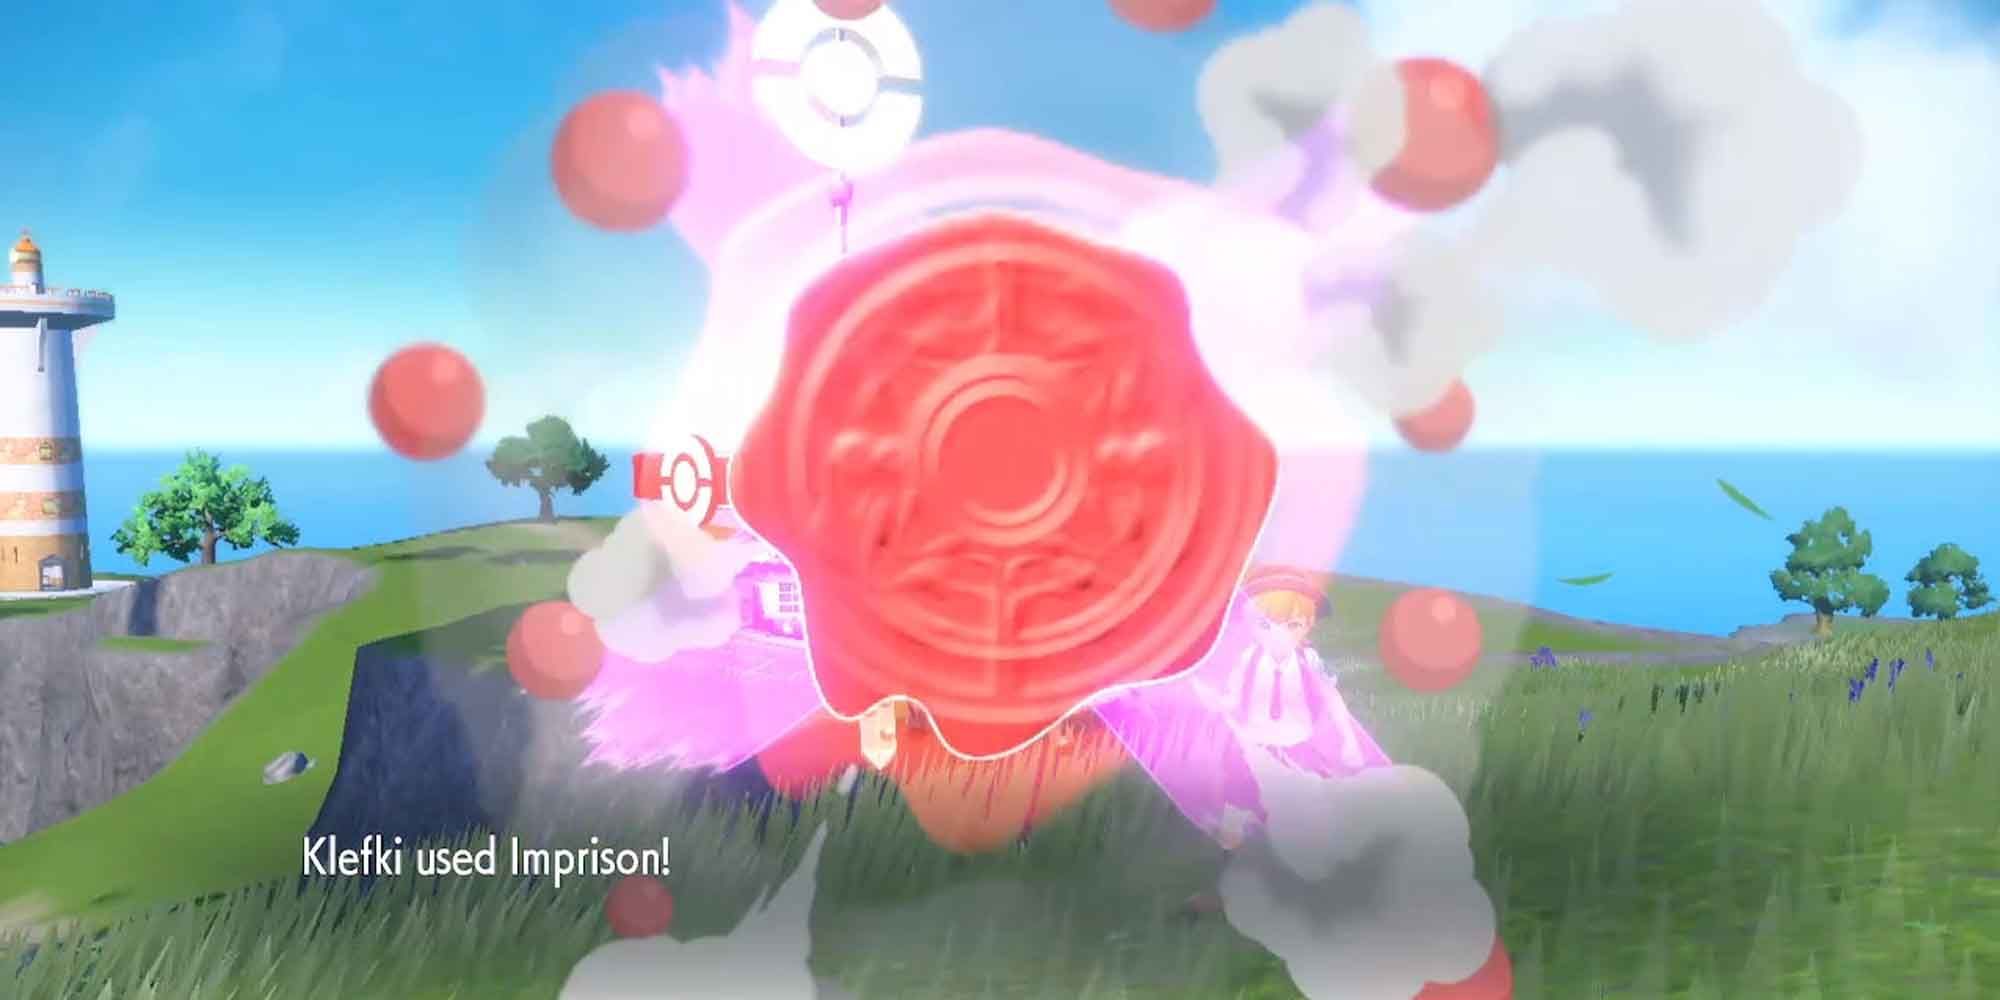 The wax seal of the Imprison move in Pokemon